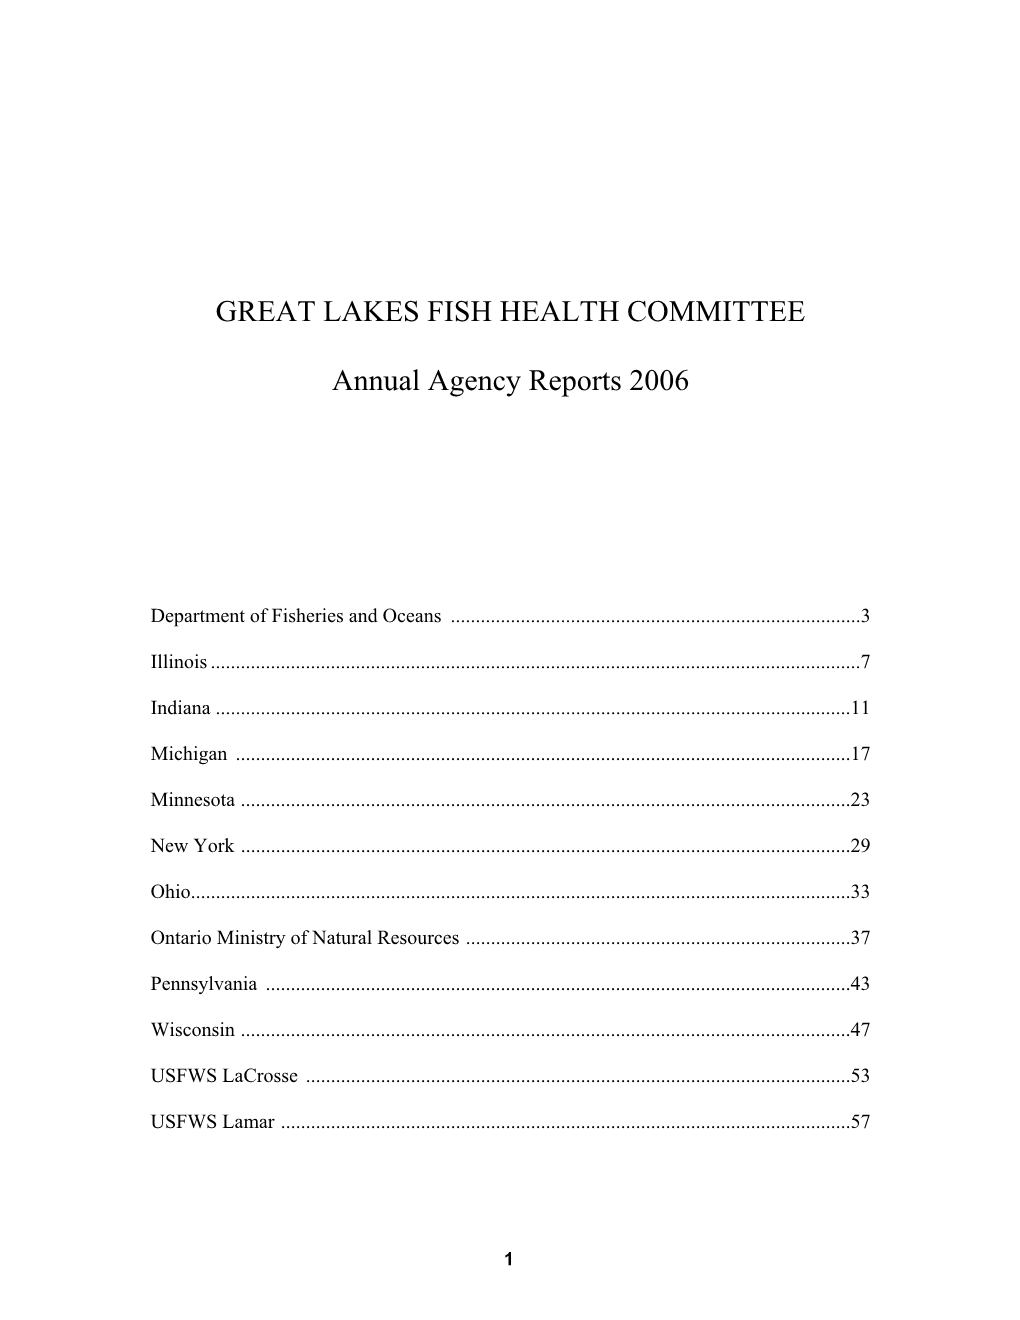 GREAT LAKES FISH HEALTH COMMITTEE Annual Agency